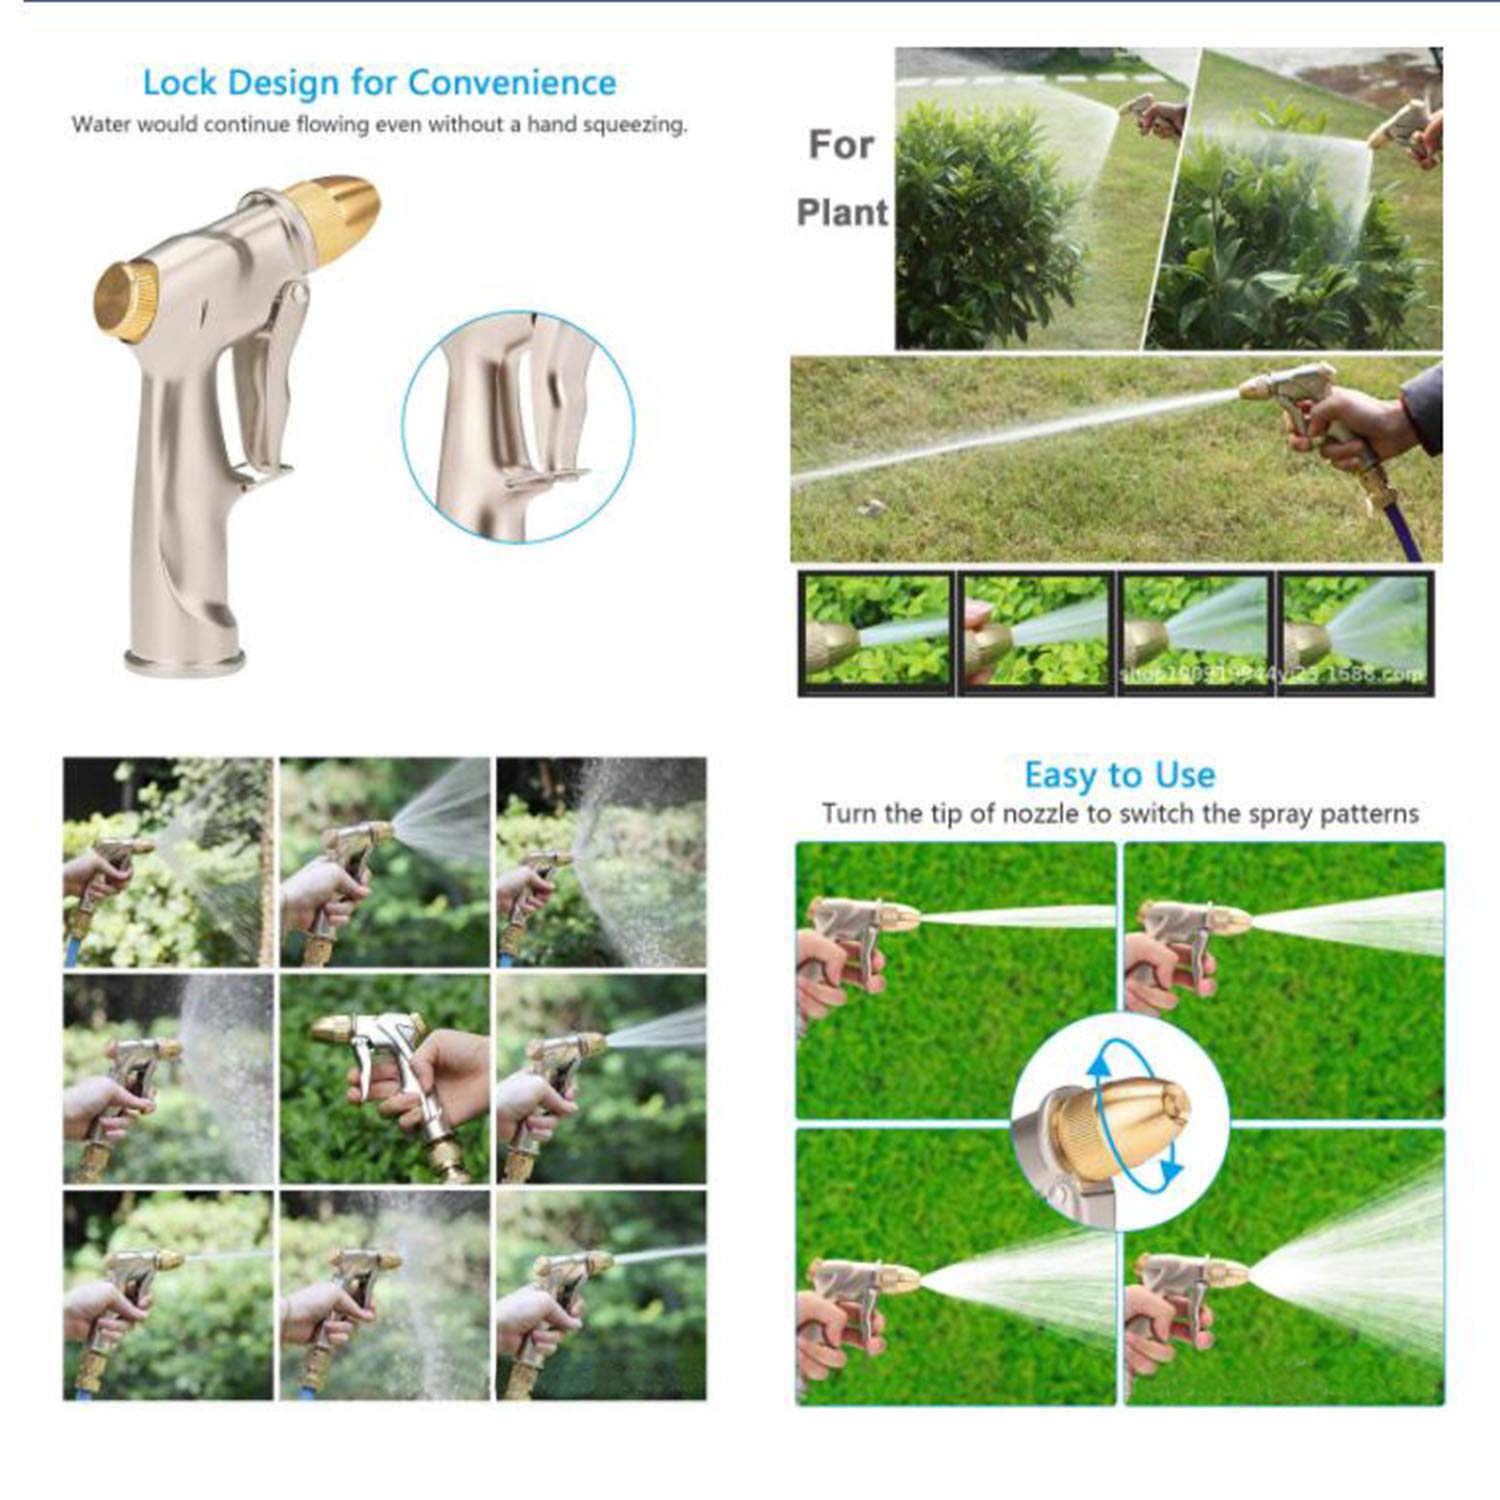 Heavy Metal Hose Nozzle, Garden Hose Nozzle, High Pressure Water Nozzle, Adjustable Watering Mode, Brass Nozzle With Quick Connector, For Pet Shower, Garden Plant Watering, Car Cleaning Nozzle (02)